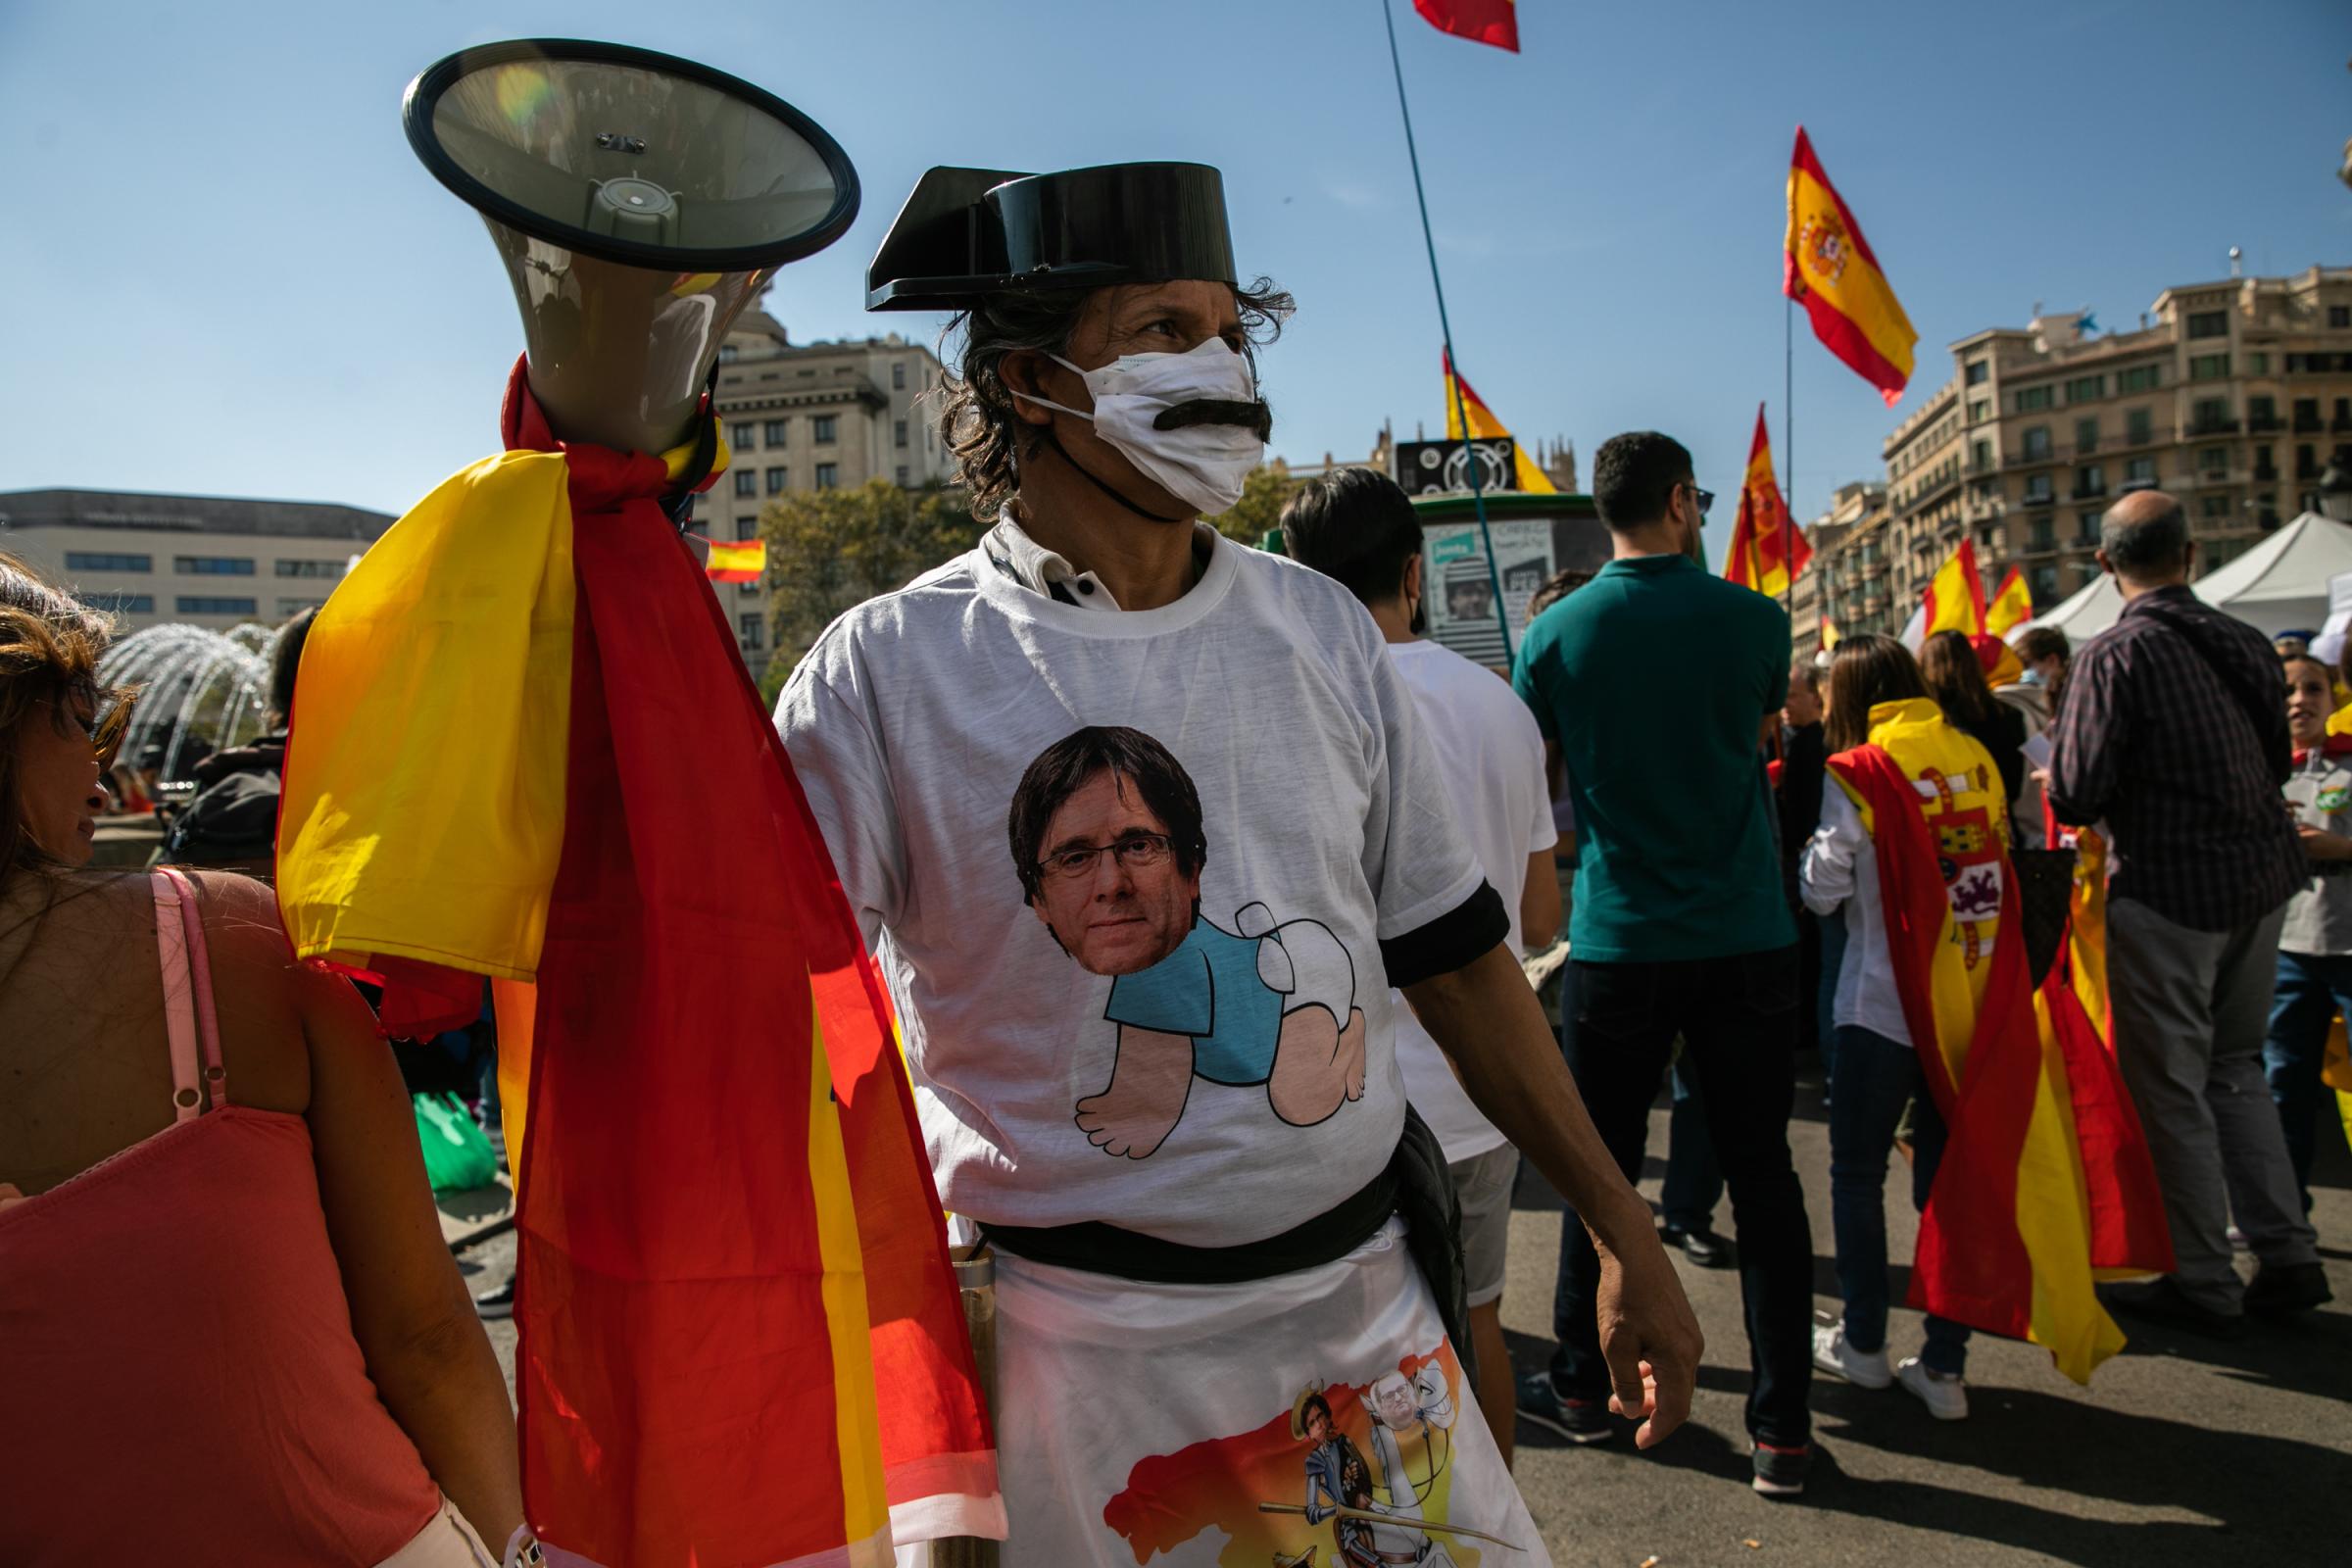 Spain's National Day Overshadowed By Colonialist Past  - BARCELONA, SPAIN - OCTOBER 12: A man dresses up as Tejero...